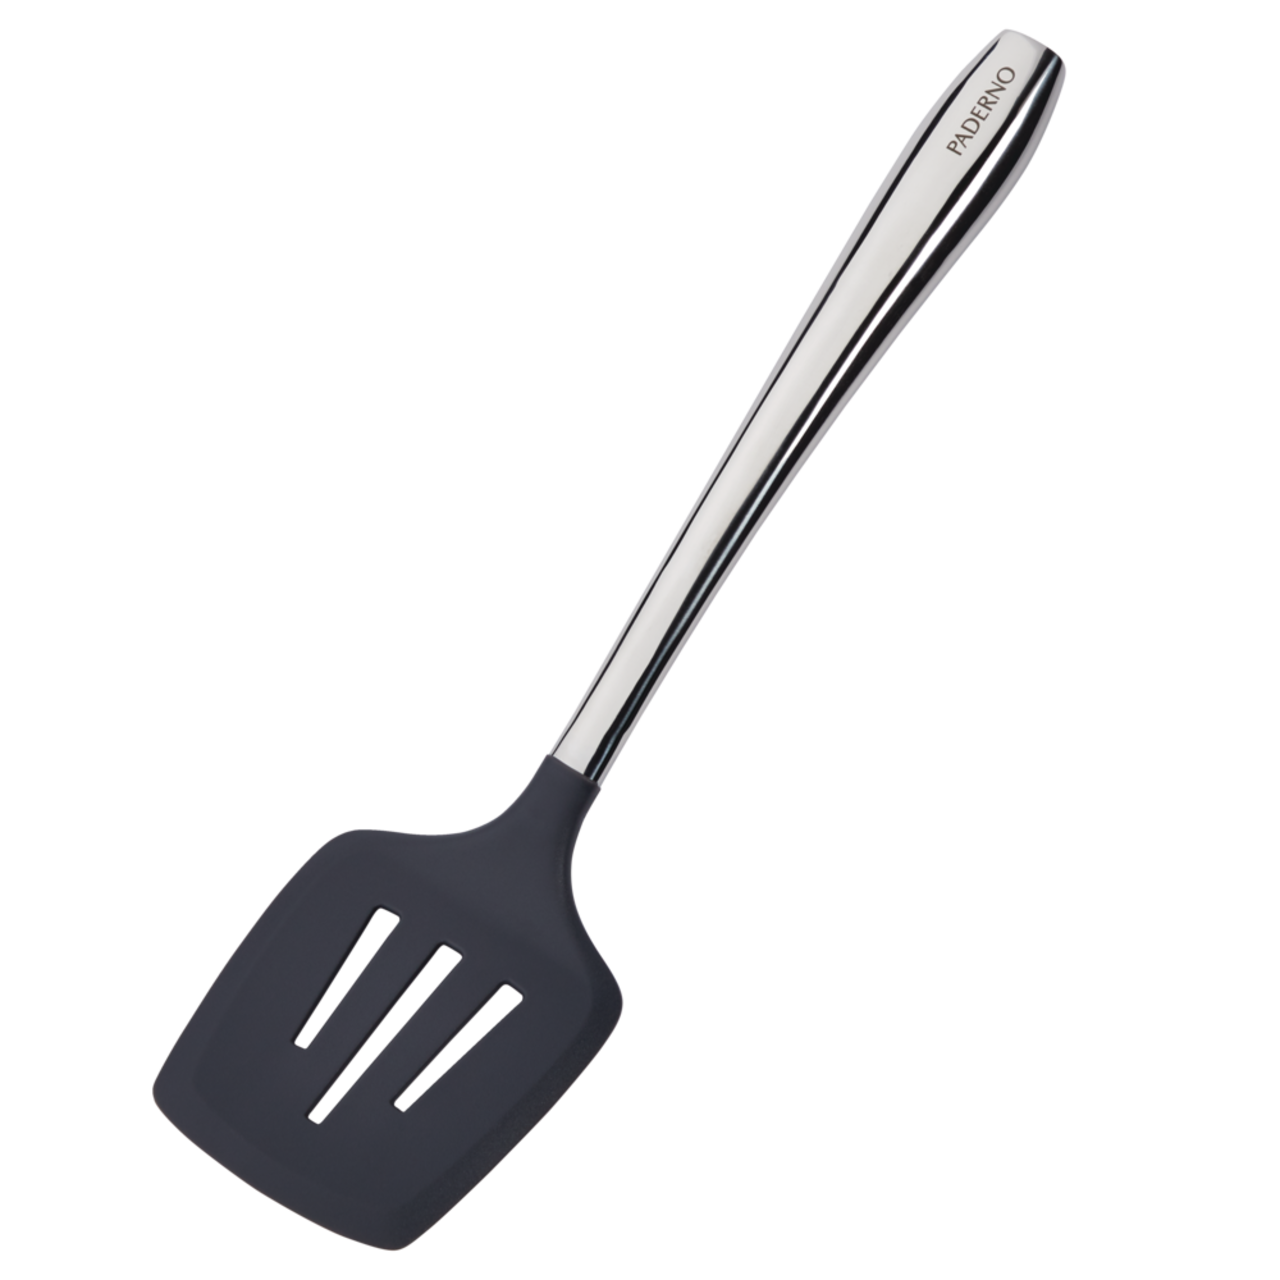 https://media-www.canadiantire.ca/product/living/kitchen/kitchen-tools-thermometers/1422289/paderno-slotted-turner-785c22a0-b188-4148-91e9-a605e5e9c283.png?imdensity=1&imwidth=640&impolicy=mZoom